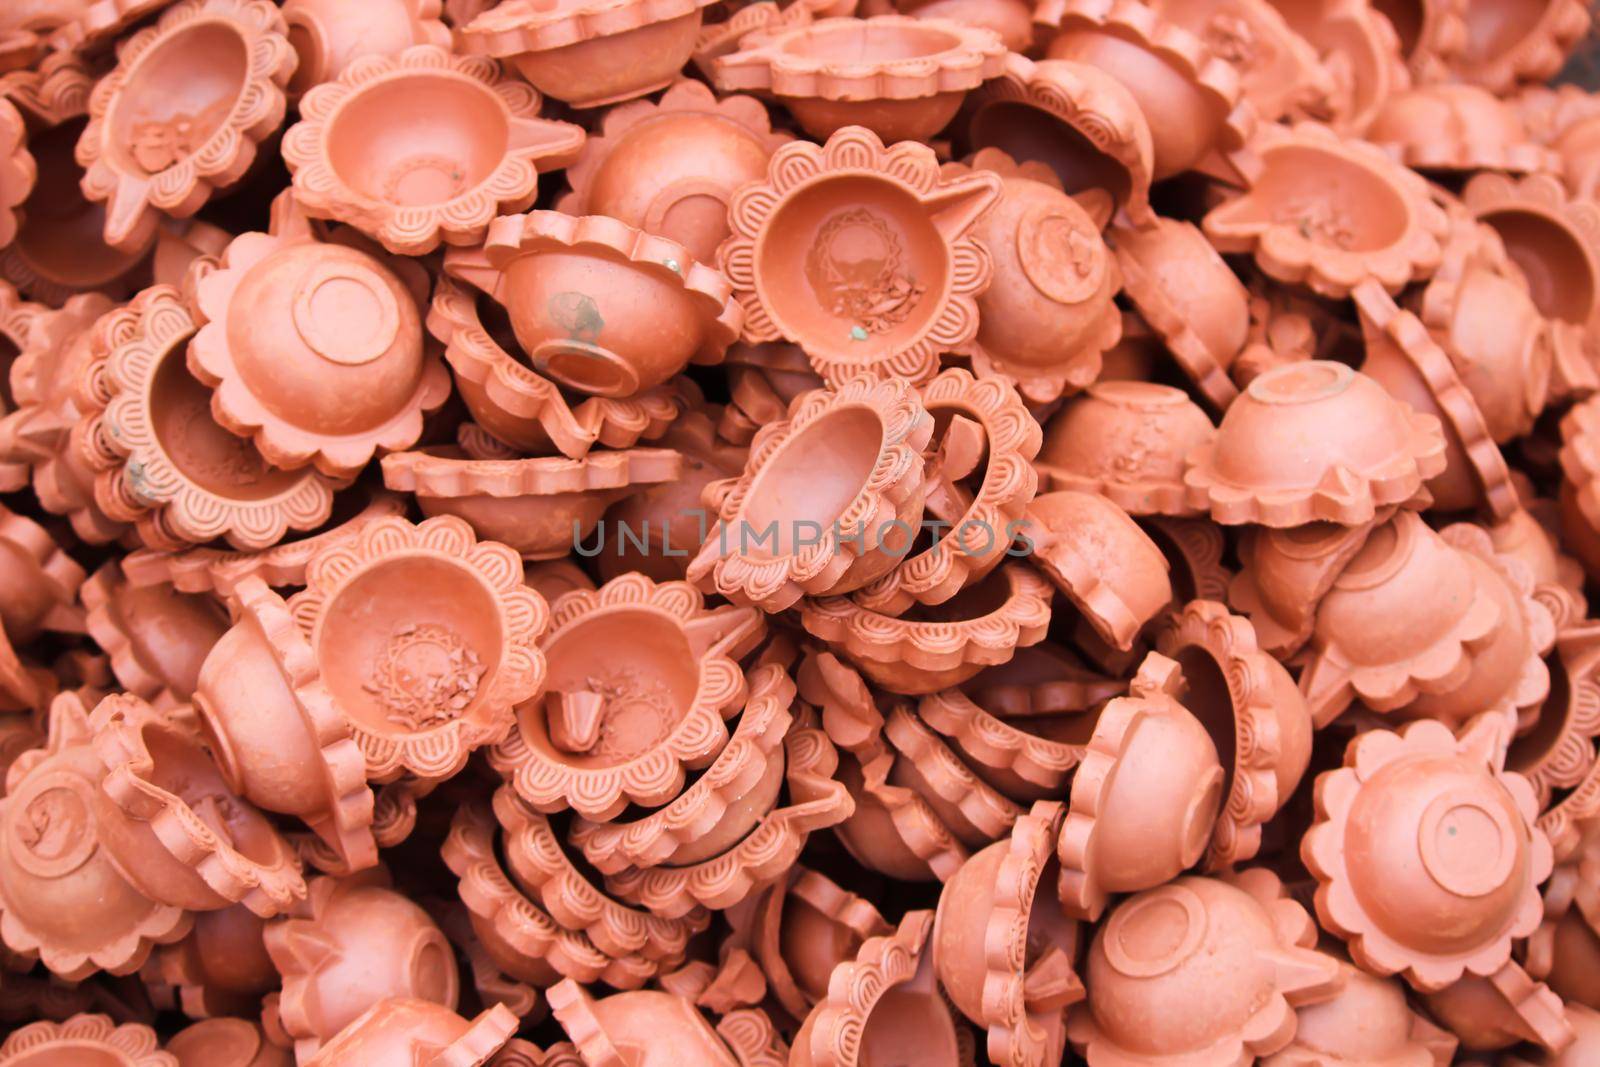 clay lamp (Diya) for sale at Market in india, diya decoration is part of Diwali Festival